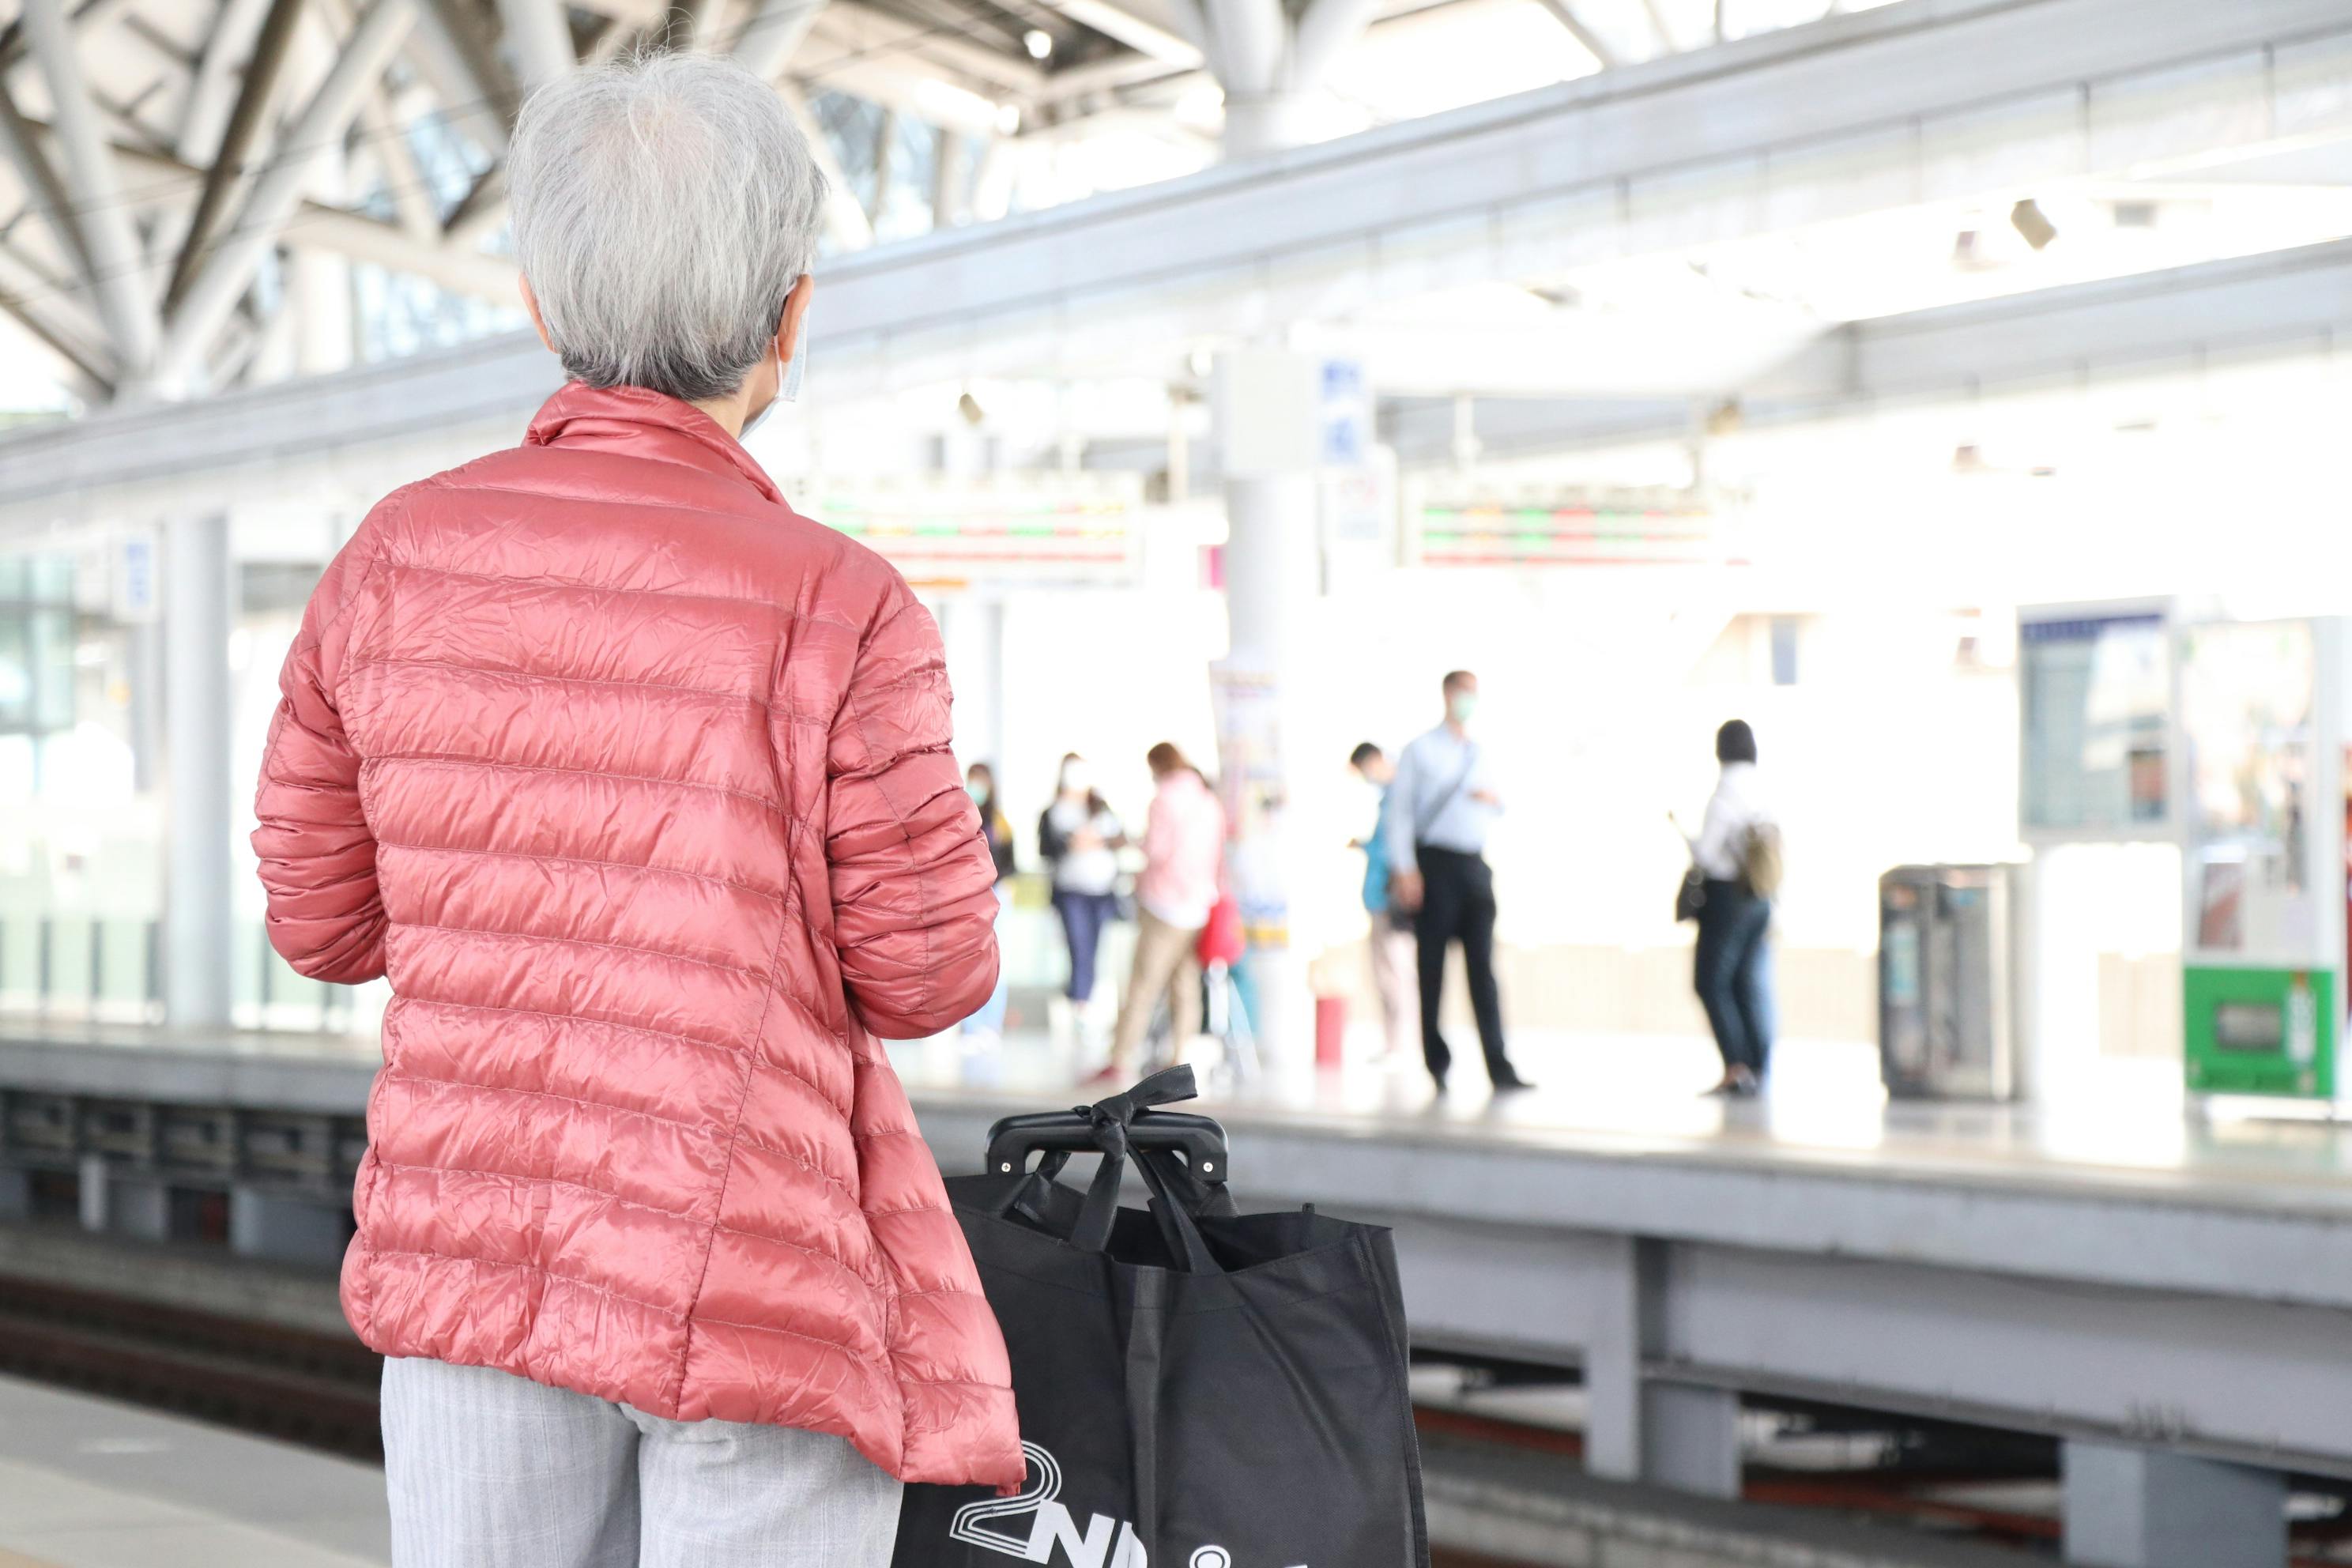 The woman all set for their trip | Source: Pexels